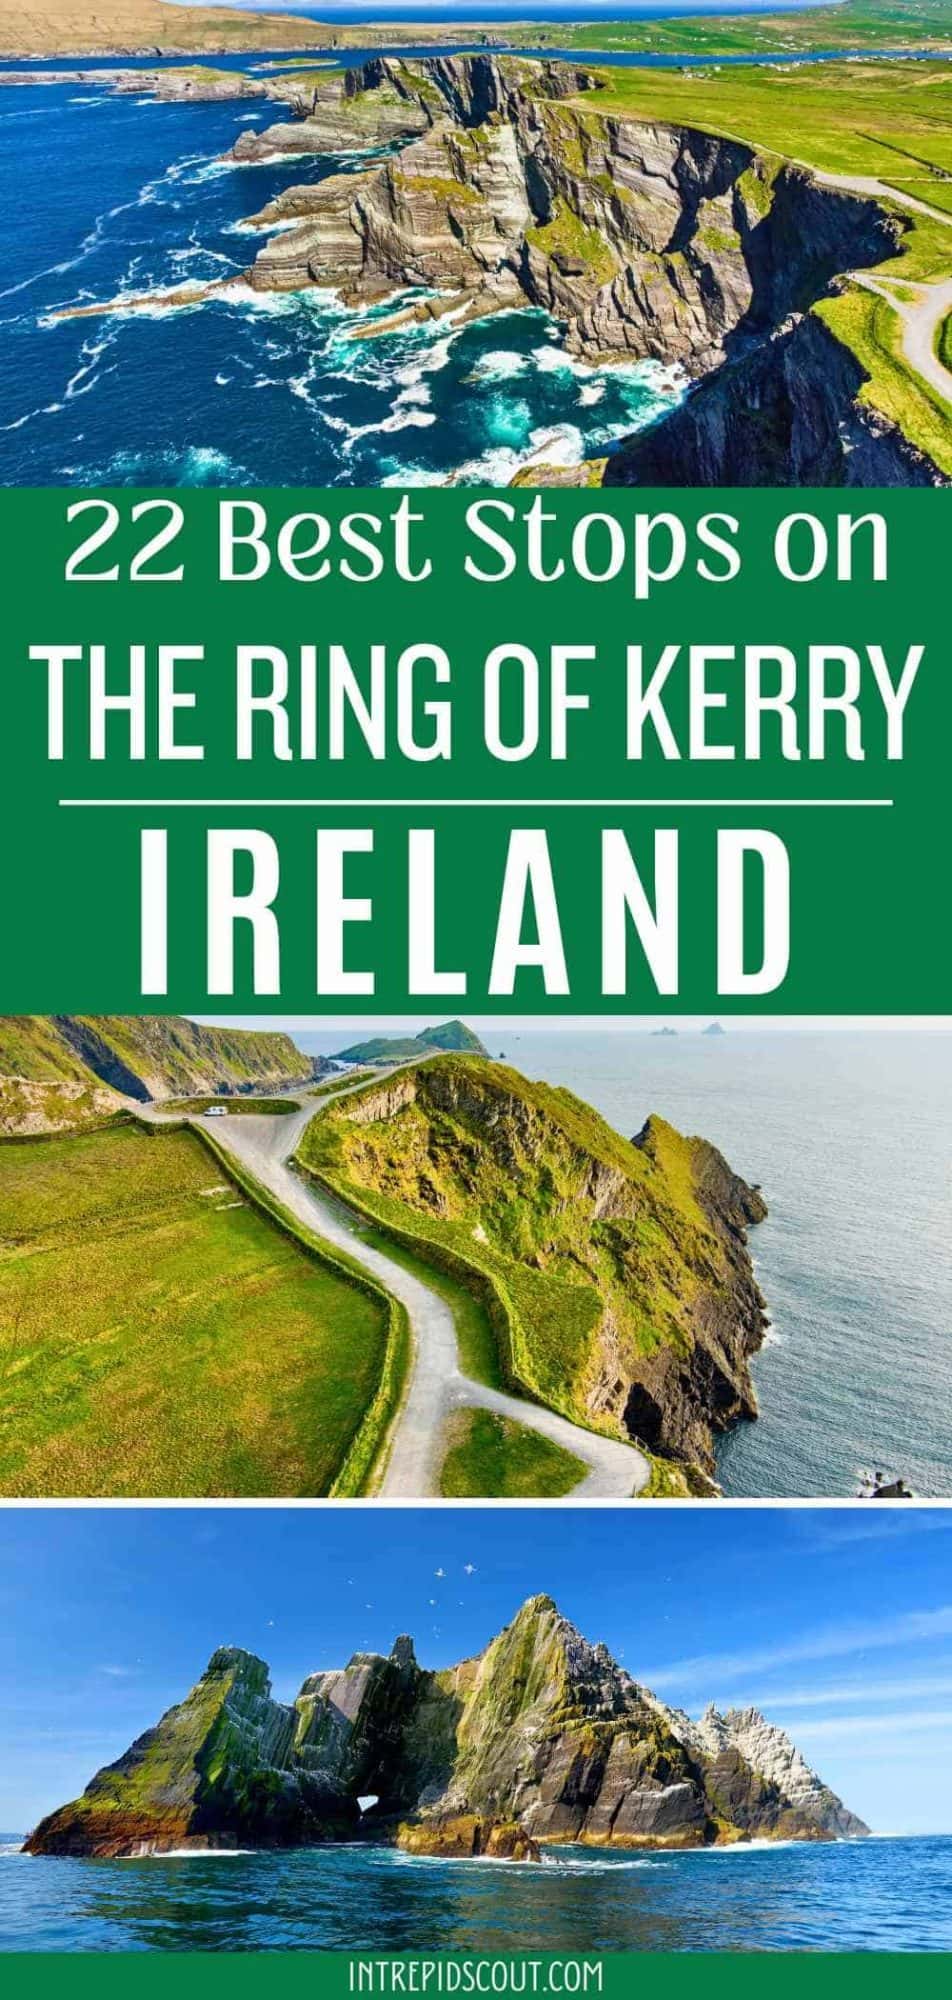 Best Stops on the Ring of Kerry